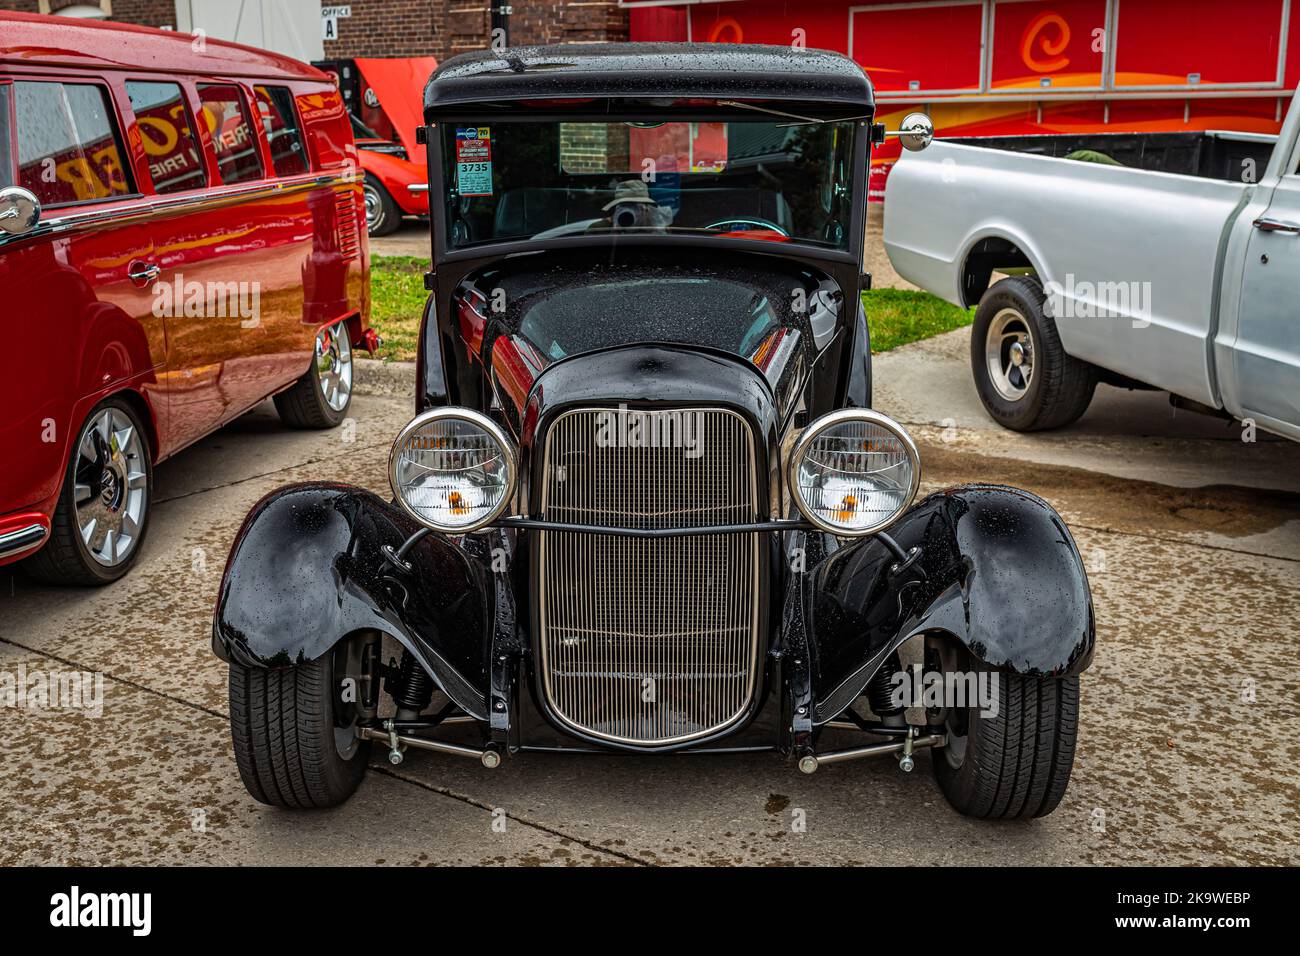 Des Moines, IA - July 01, 2022: High perspective front view of a 1930 Ford Model A Hardtop Coupe at a local car show. Stock Photo